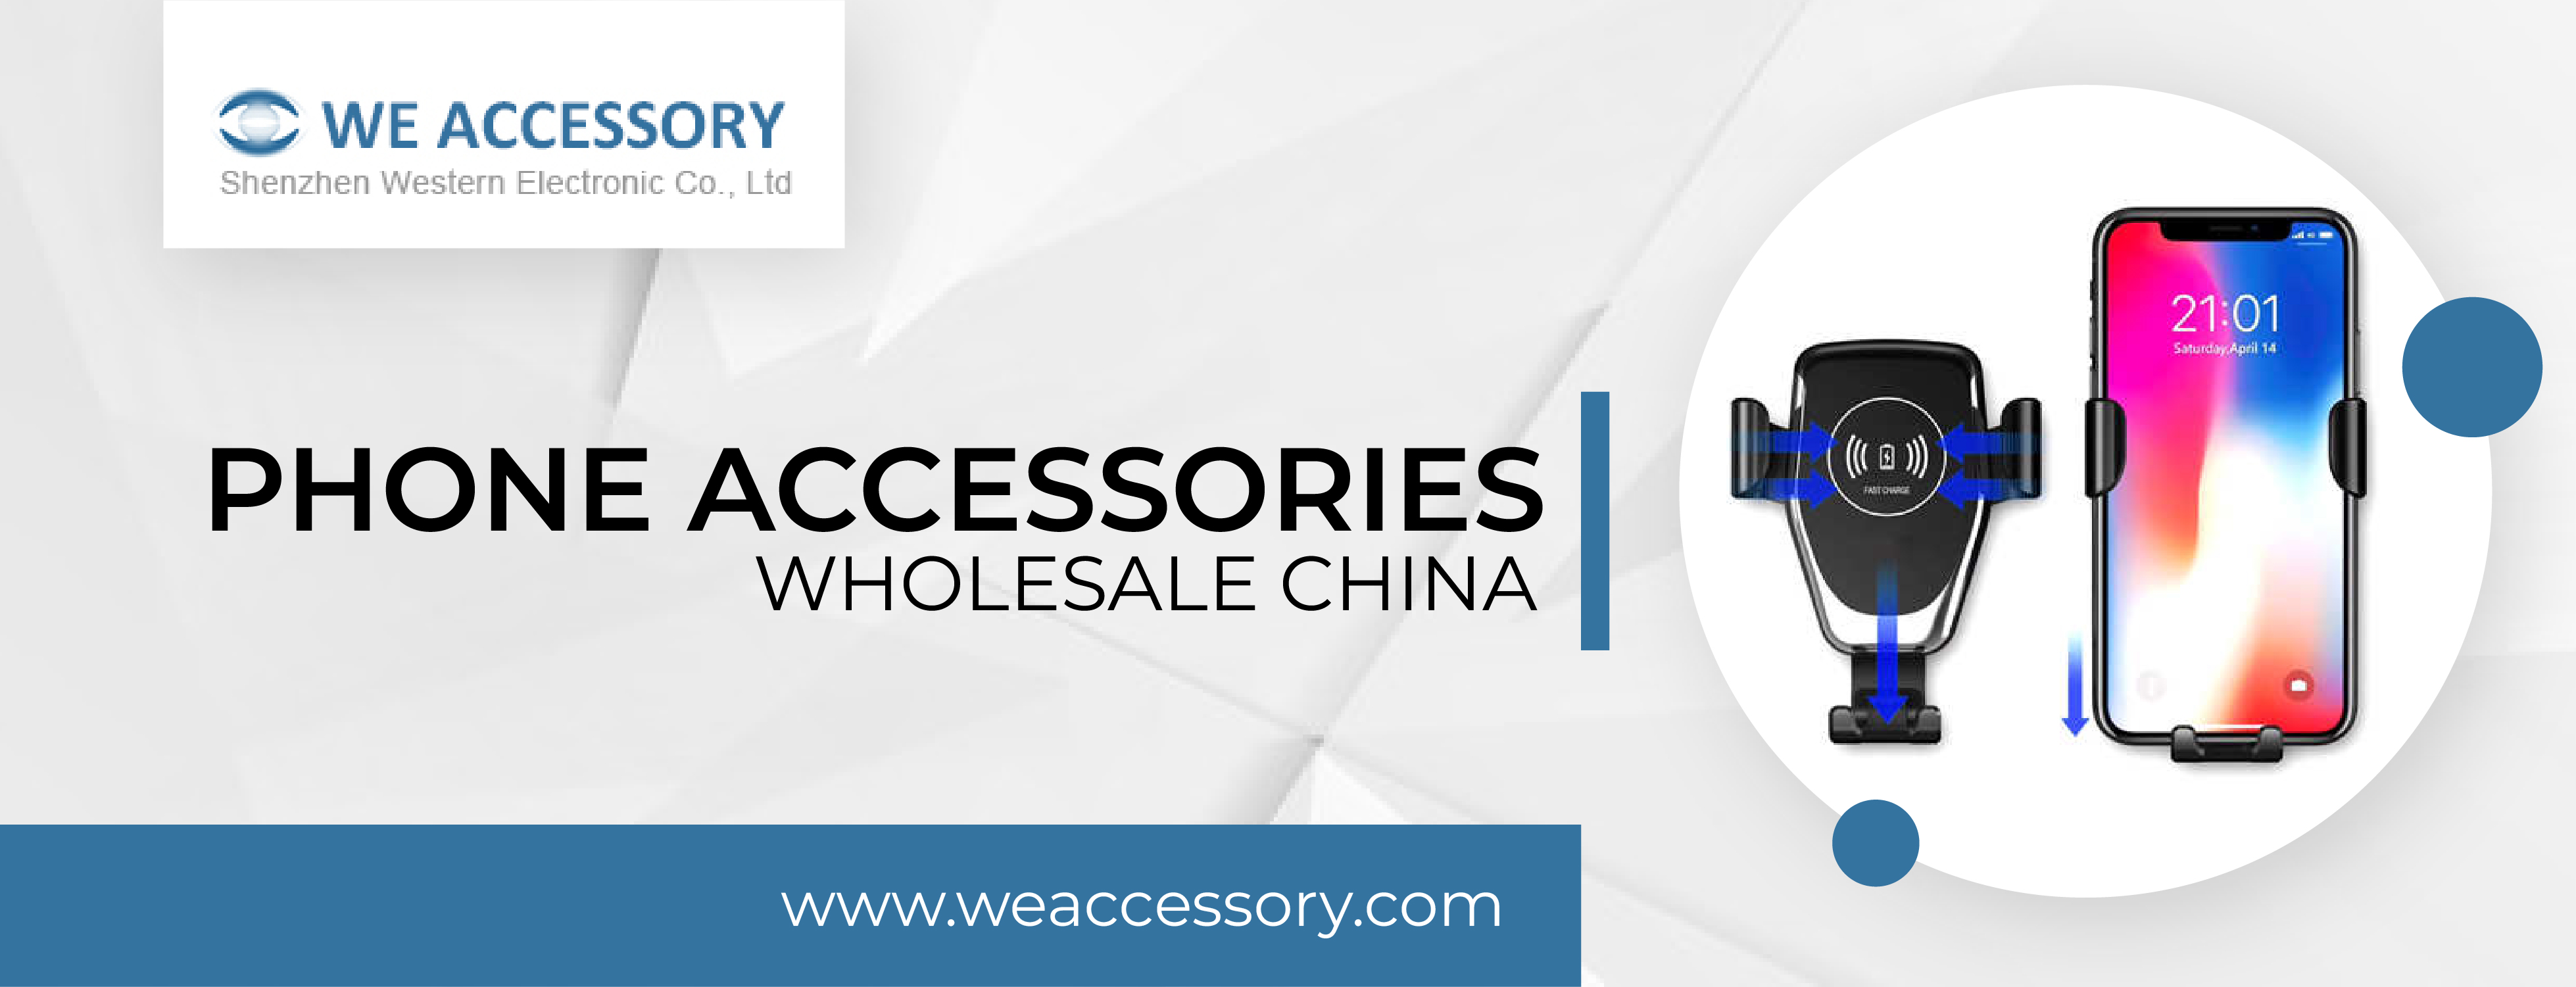 phone accessories wholesale China